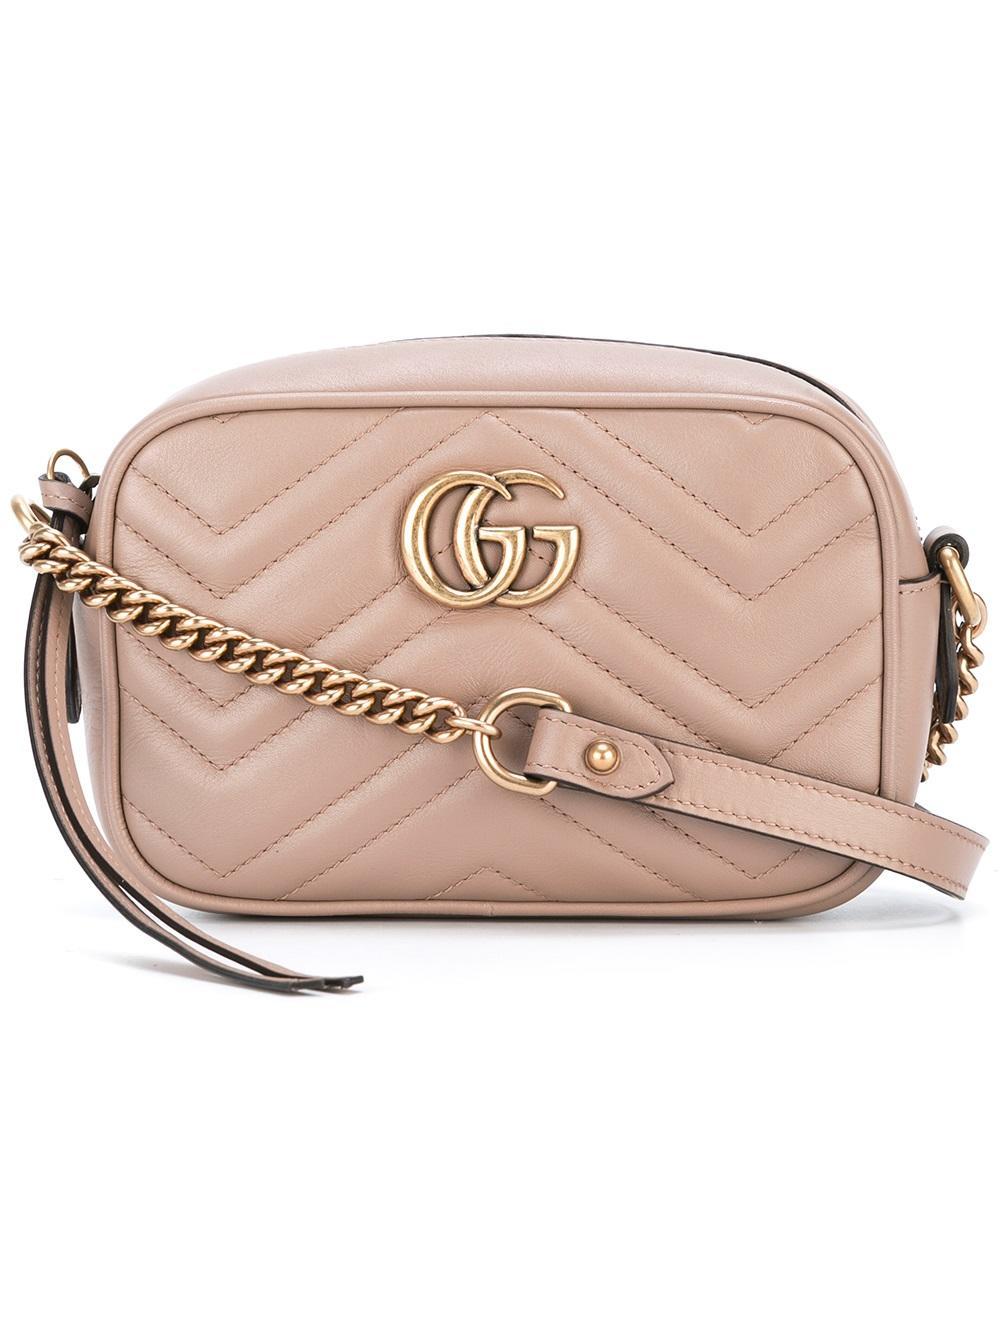 Lyst - Gucci Gg Marmont Crossbody Bag in Brown